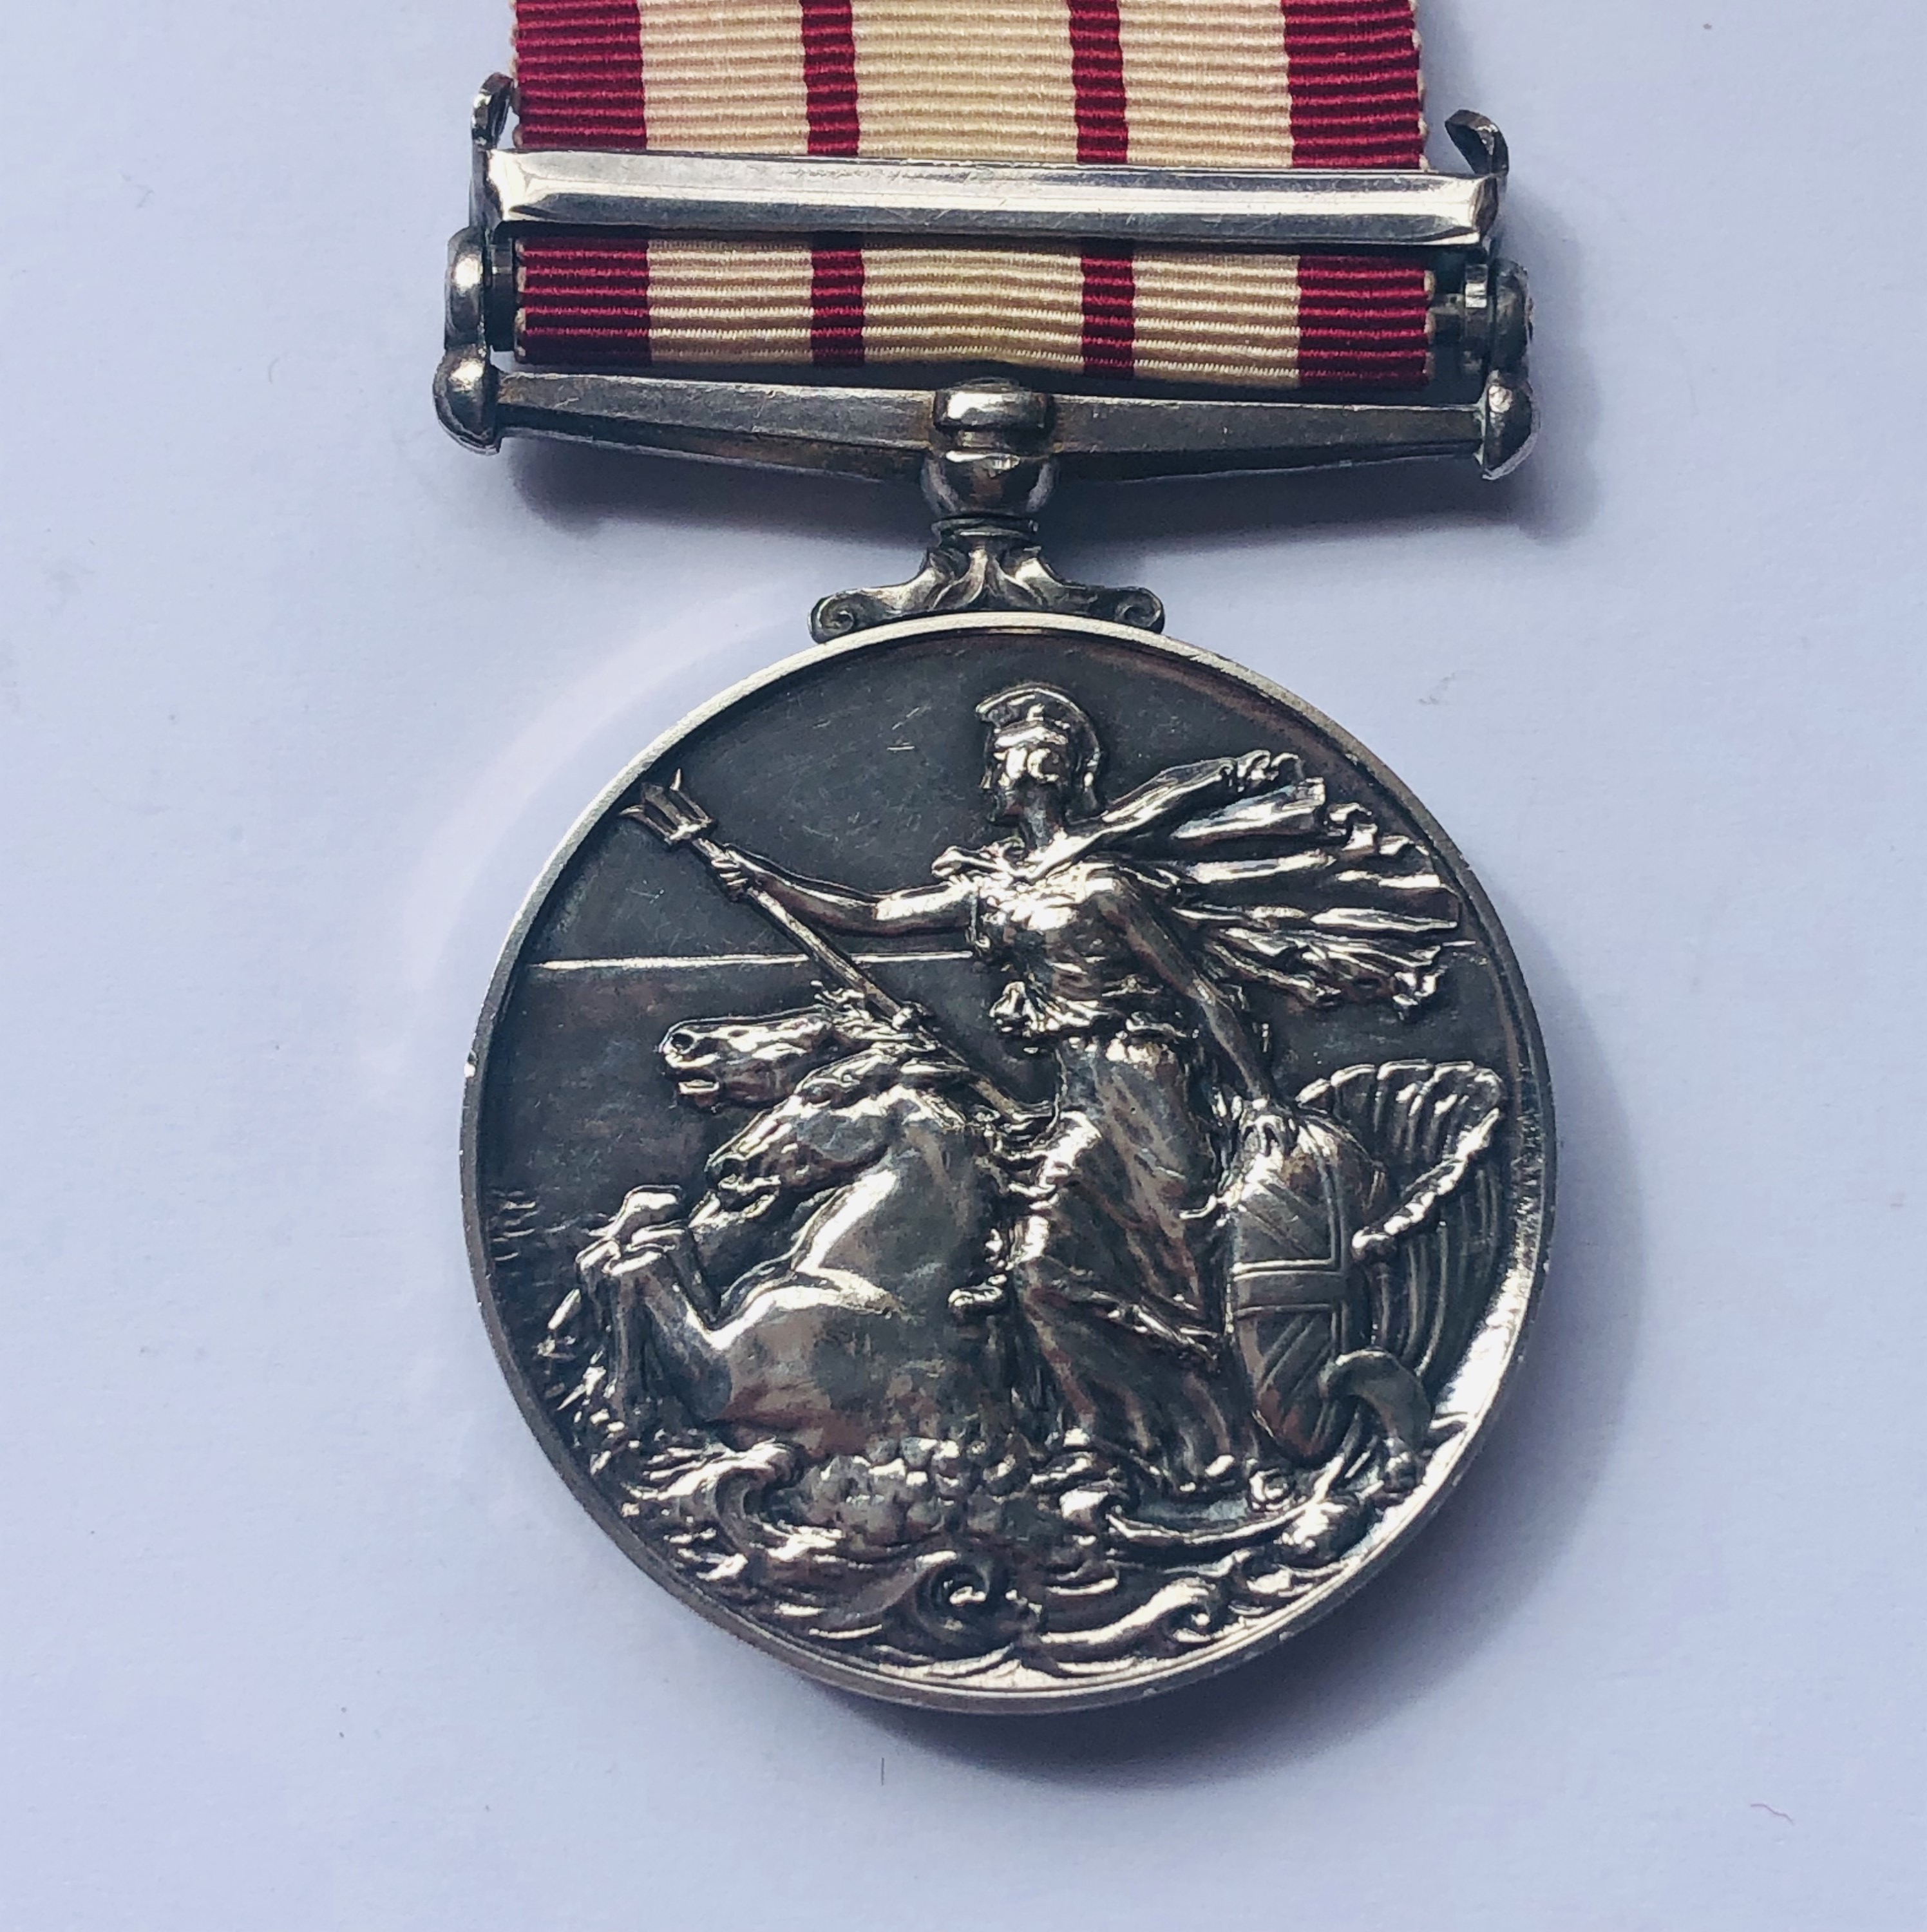 A QEII Naval General Service Medal with Near East clasp to D / K 939711 E E Birkinshaw, M (E) 1 RN - Image 2 of 3